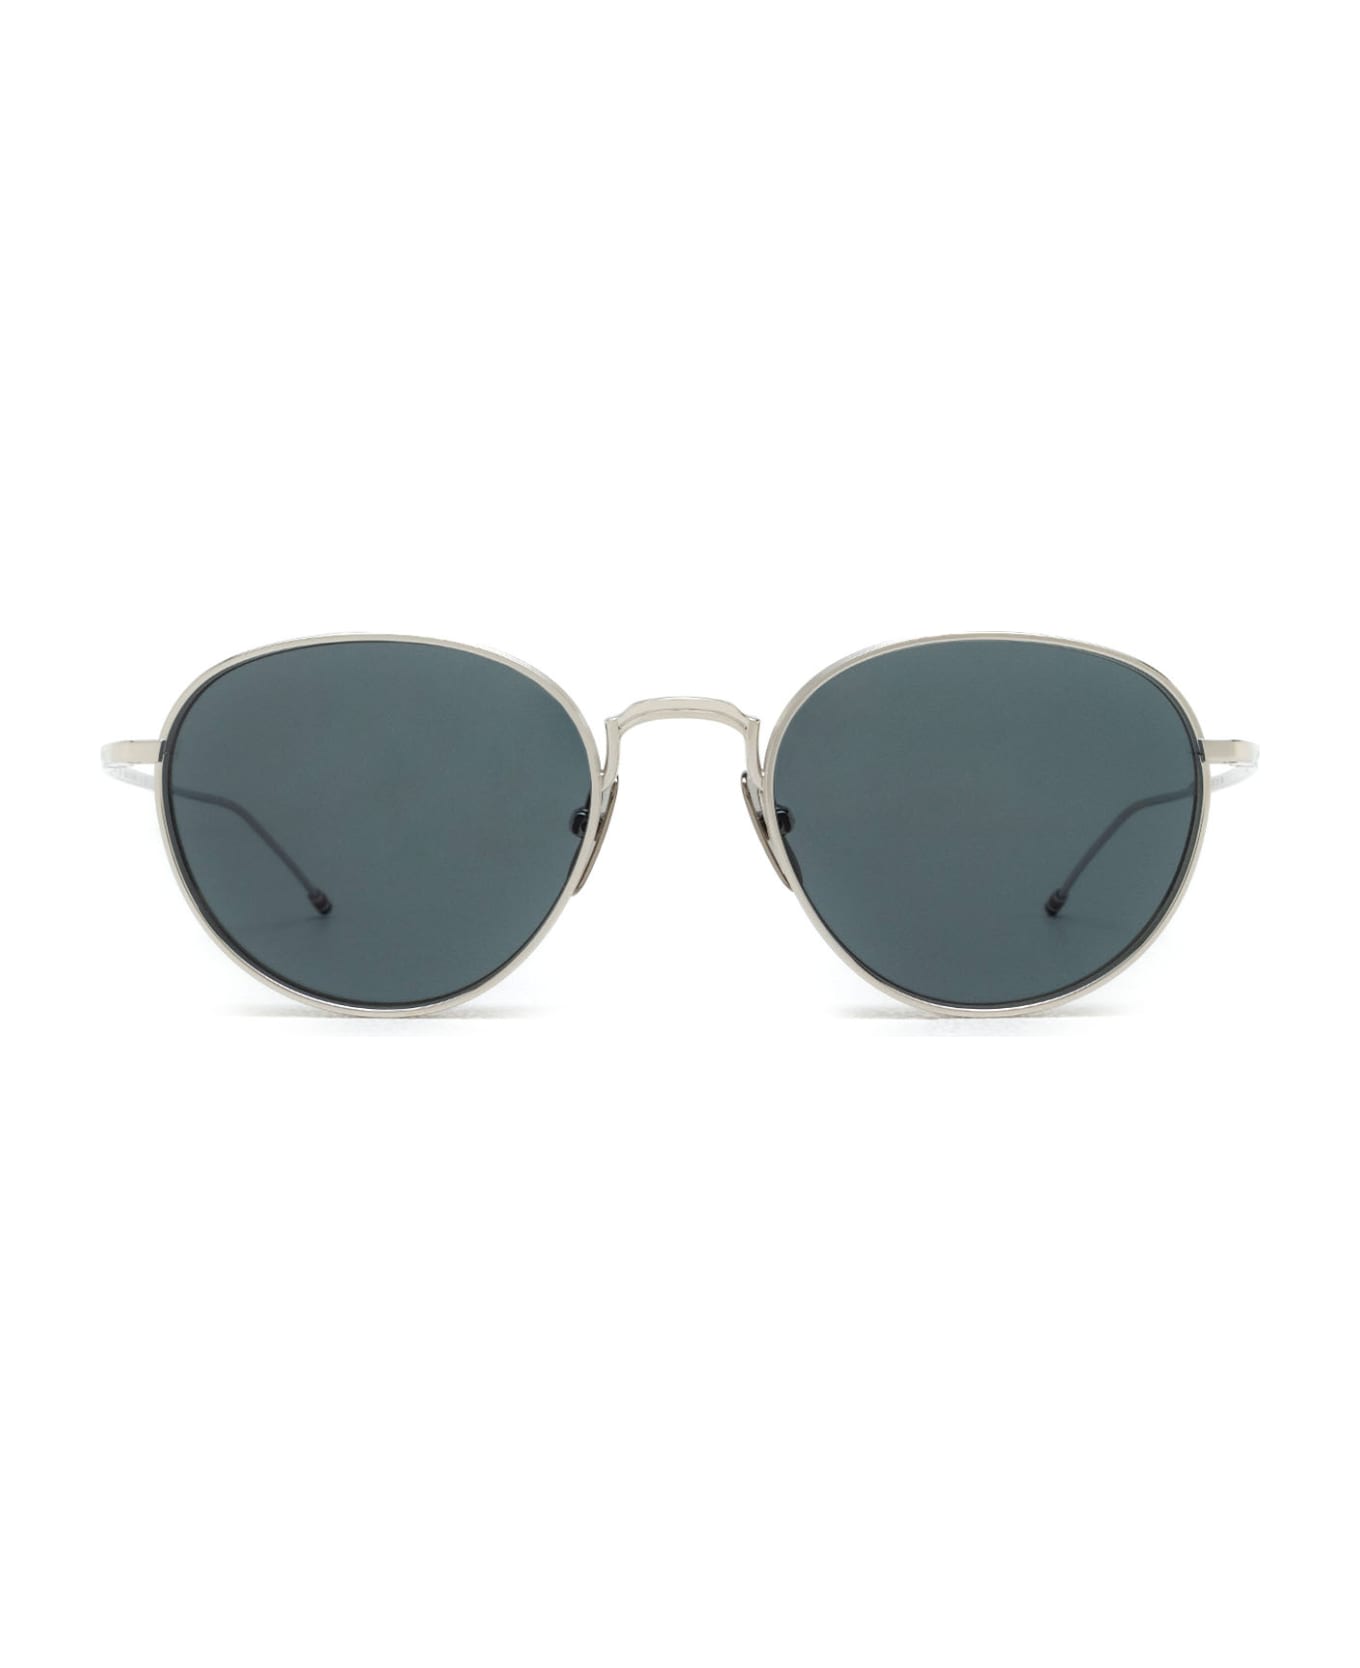 Thom Browne Ues119a Silver Sunglasses - Silver